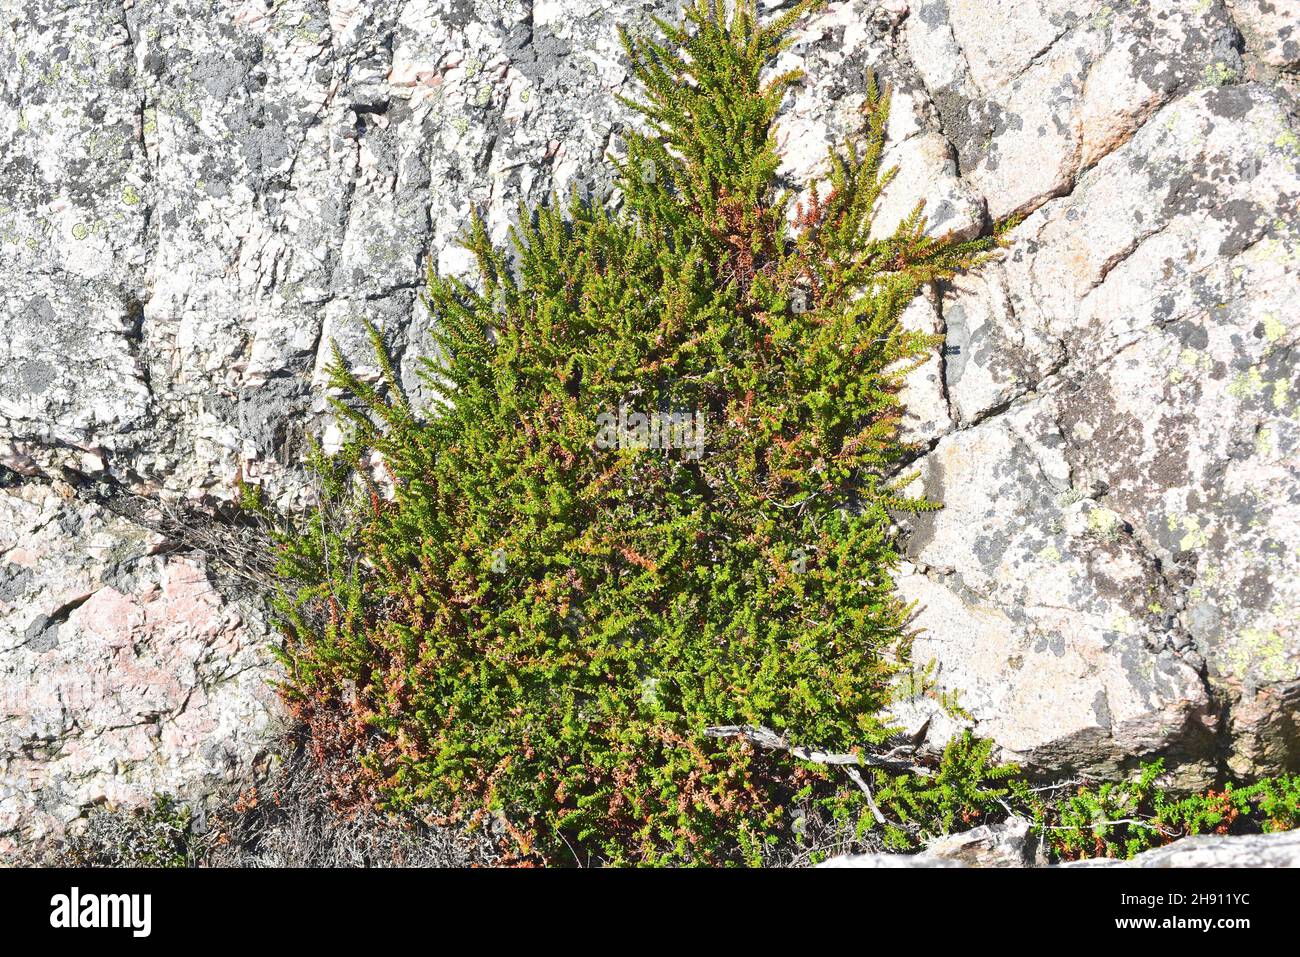 Black crowberry (Empetrum nigrum) is a shrub native to north Europe and south Europe mountains. This photo was taken in Bohuslan, Sweden. Stock Photo